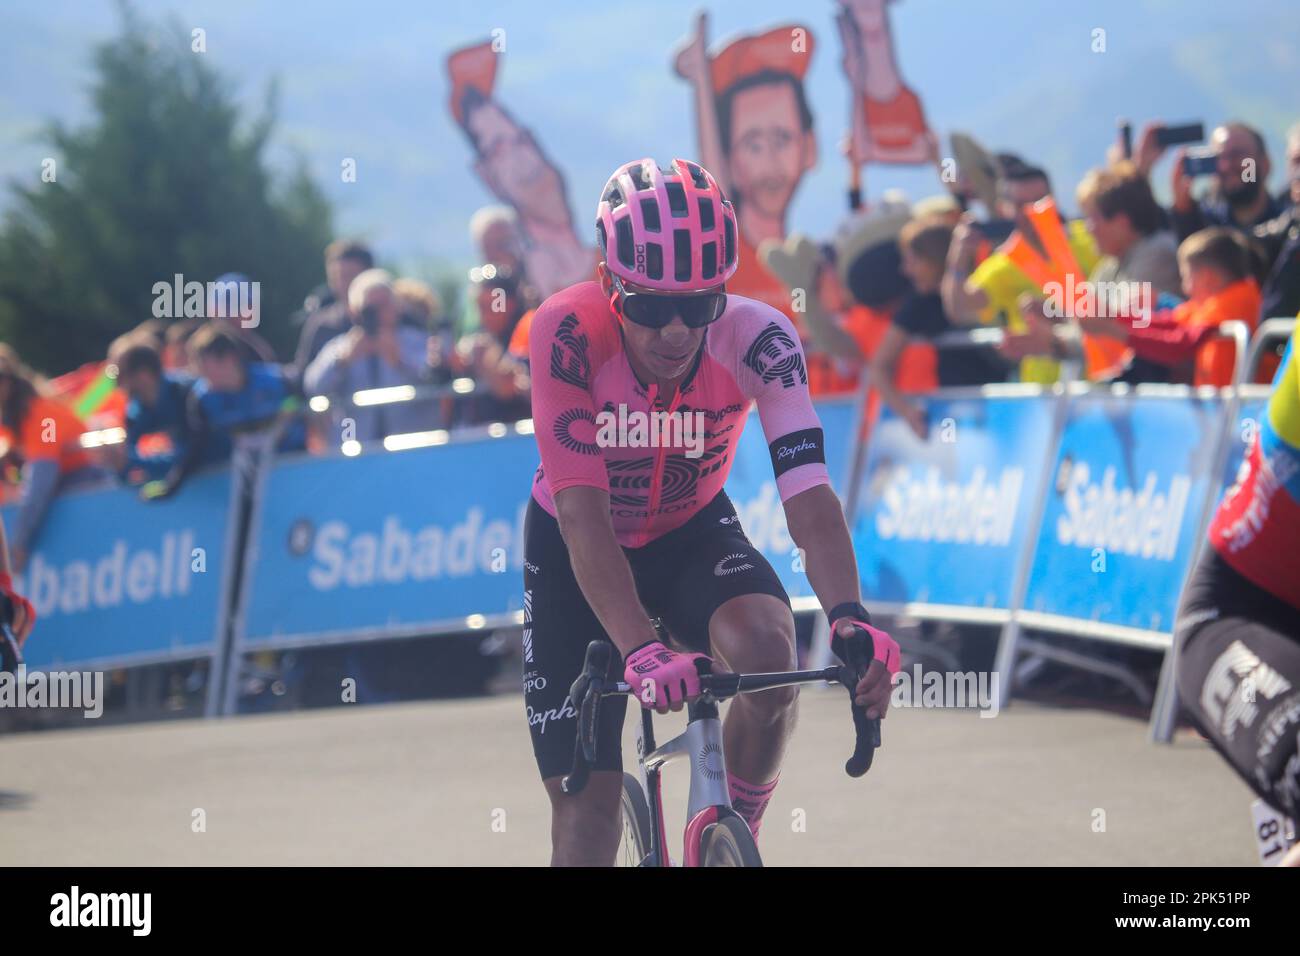 Amasa-Villabona, Spain, 05th April, 2023: The EF Education - EasyPost rider, Rigoberto Uran reaching the finish line during the 3rd Stage of the Itzulia Basque Country 2023 between Errenteria and Amasa-Villabona on April 05, 2023, in Amasa-Villabona, Spain. Credit: Alberto Brevers / Alamy Live News Stock Photo